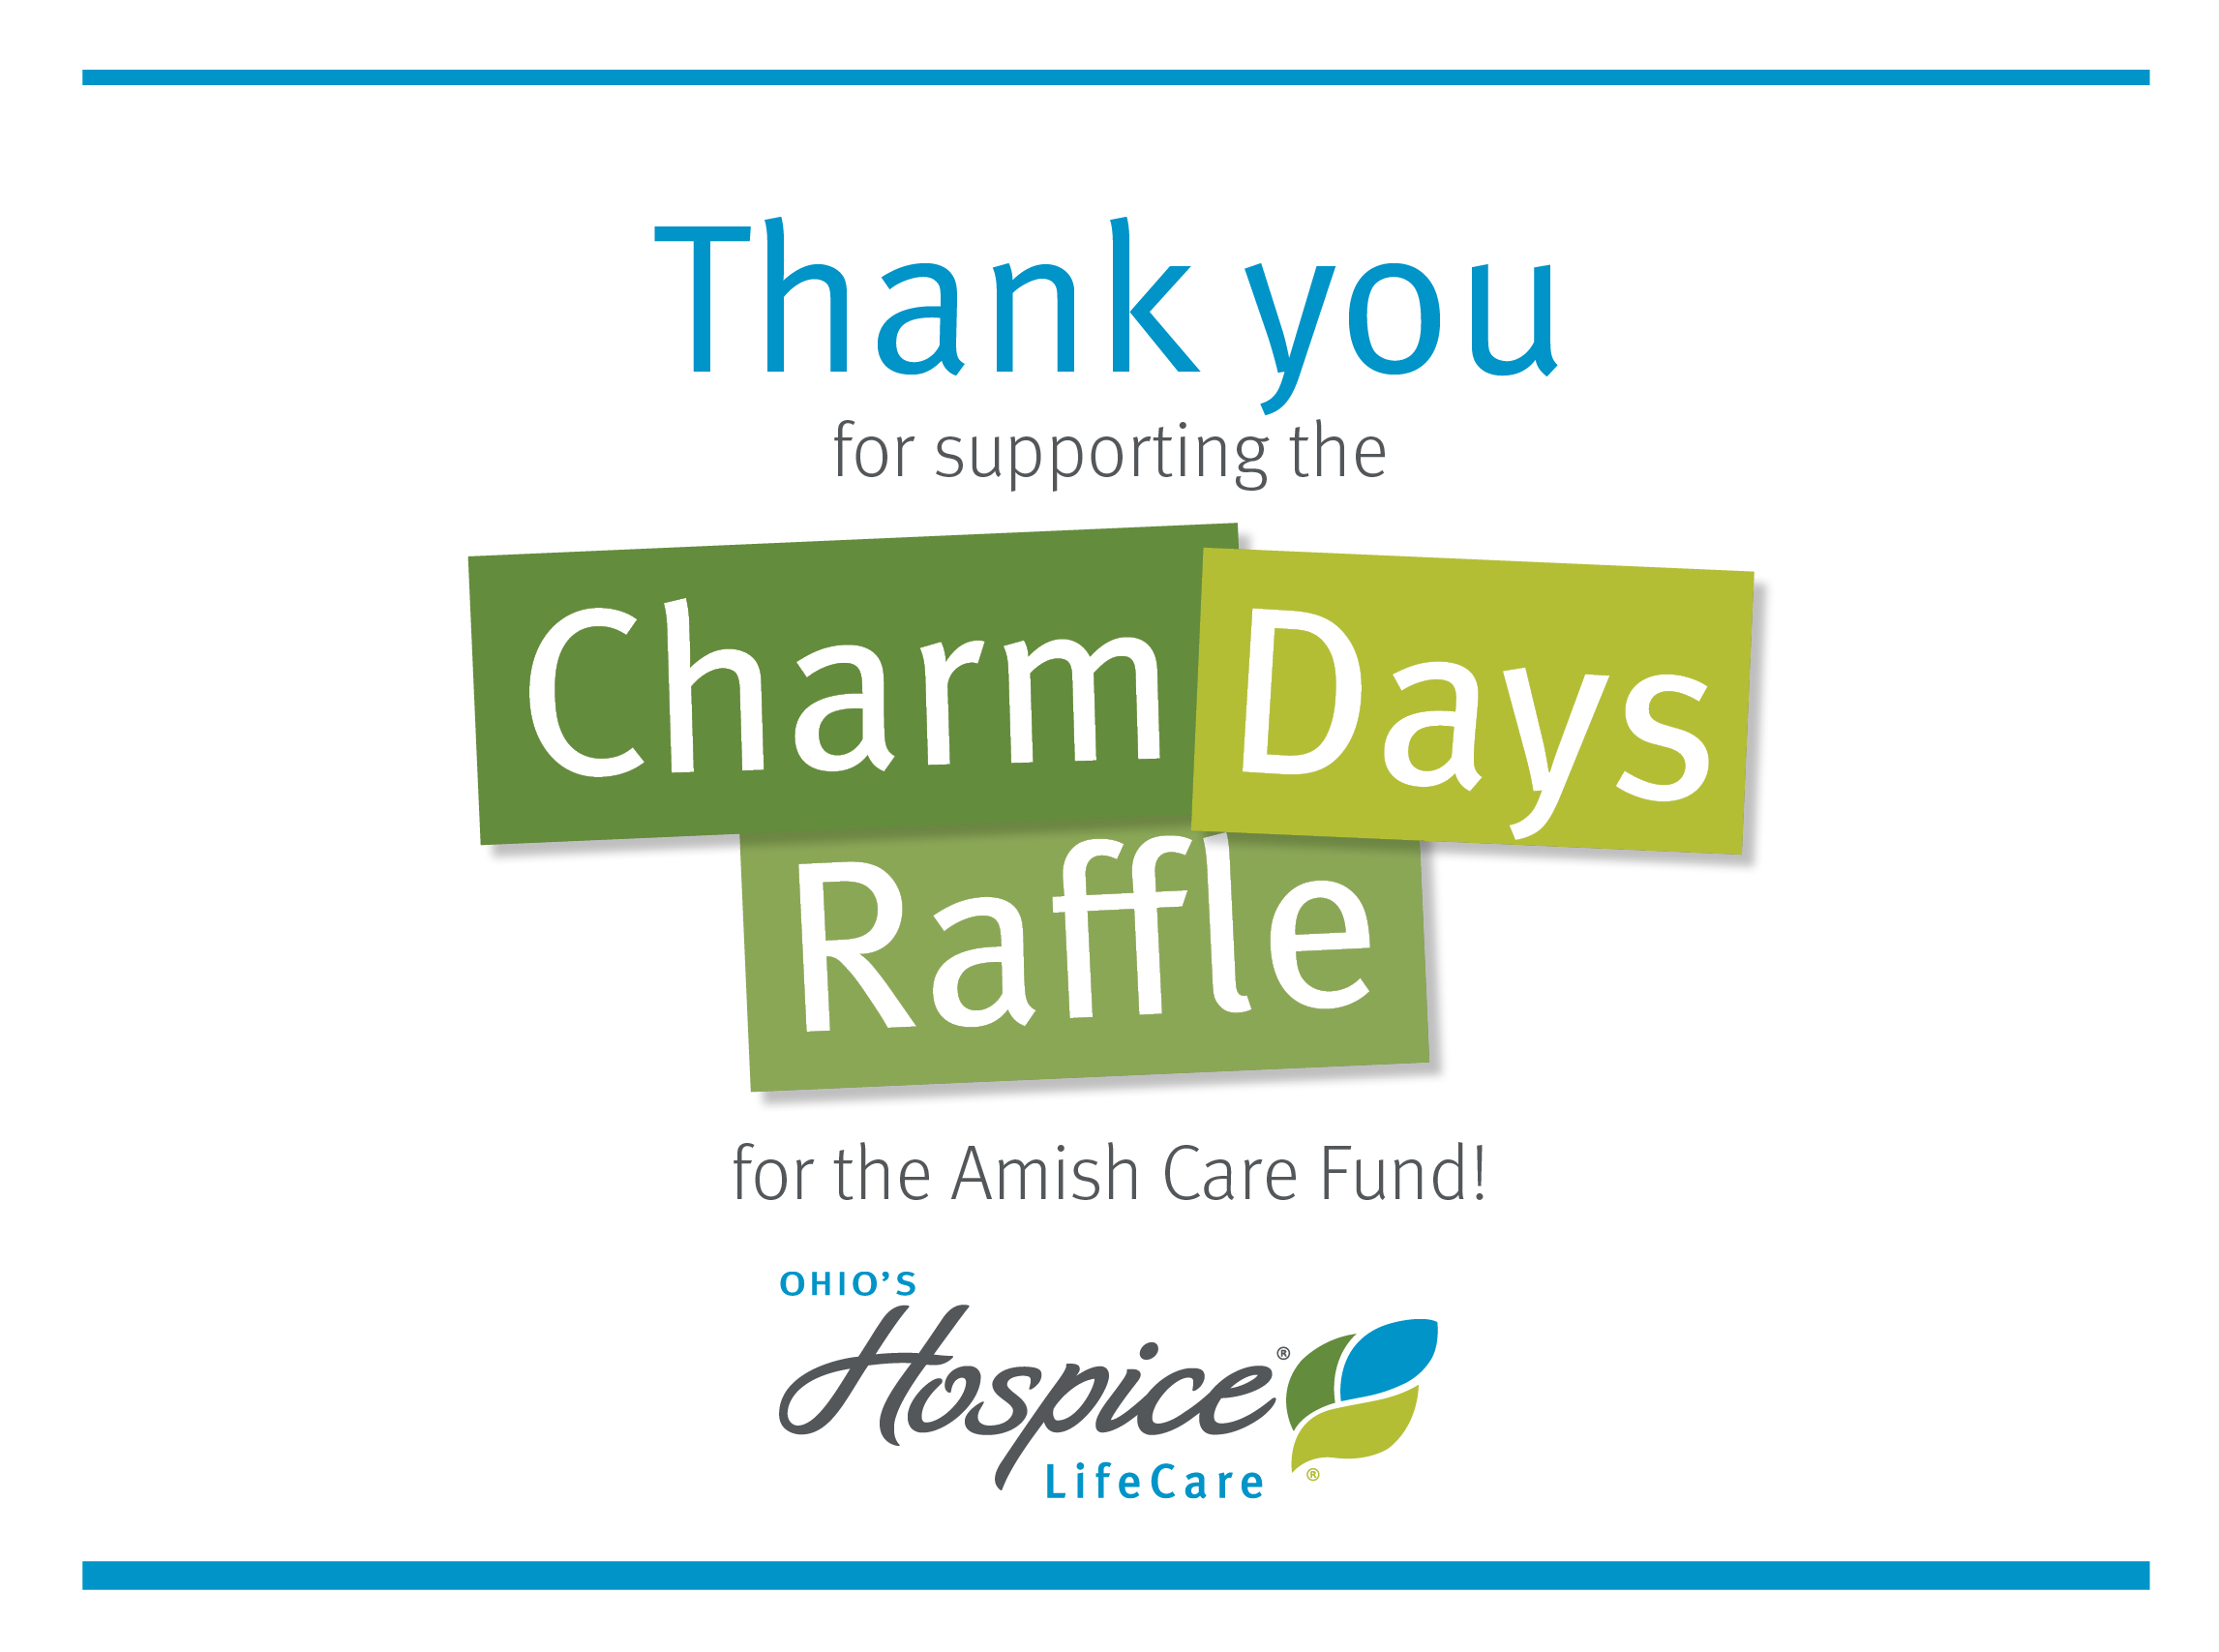 Thank you for supporting the Charm Days Raffle for the Amish Care Fund! | Ohio's Hospice LifeCare